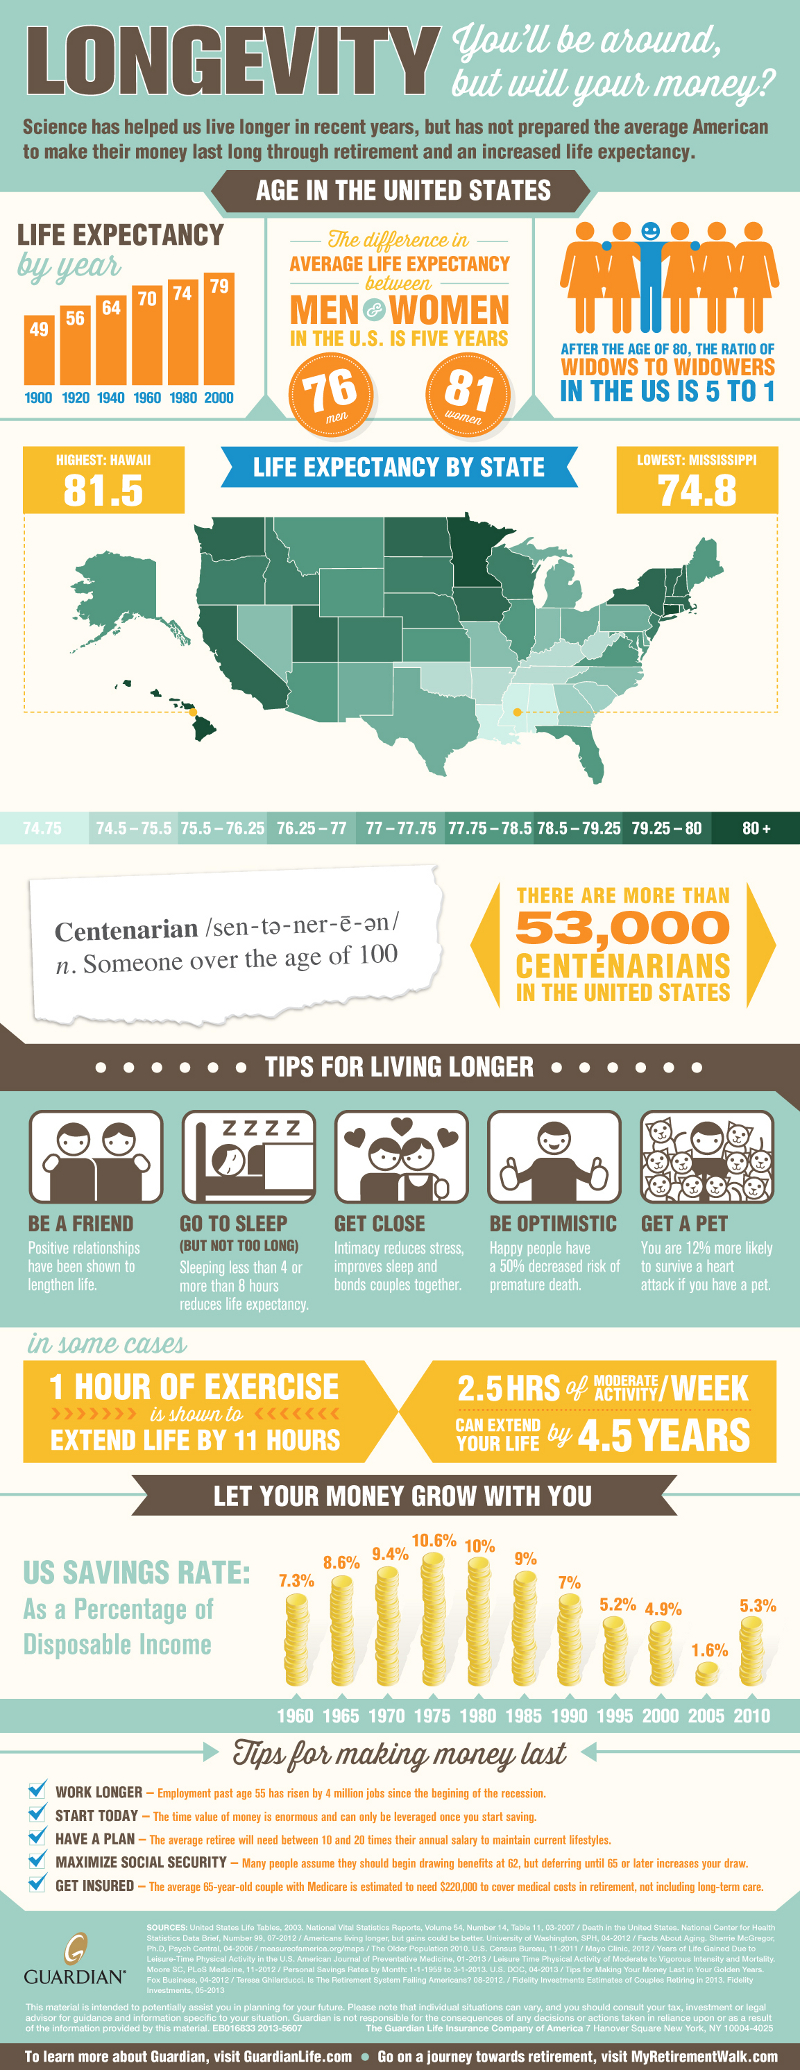 Average Life Expectancy in the United States